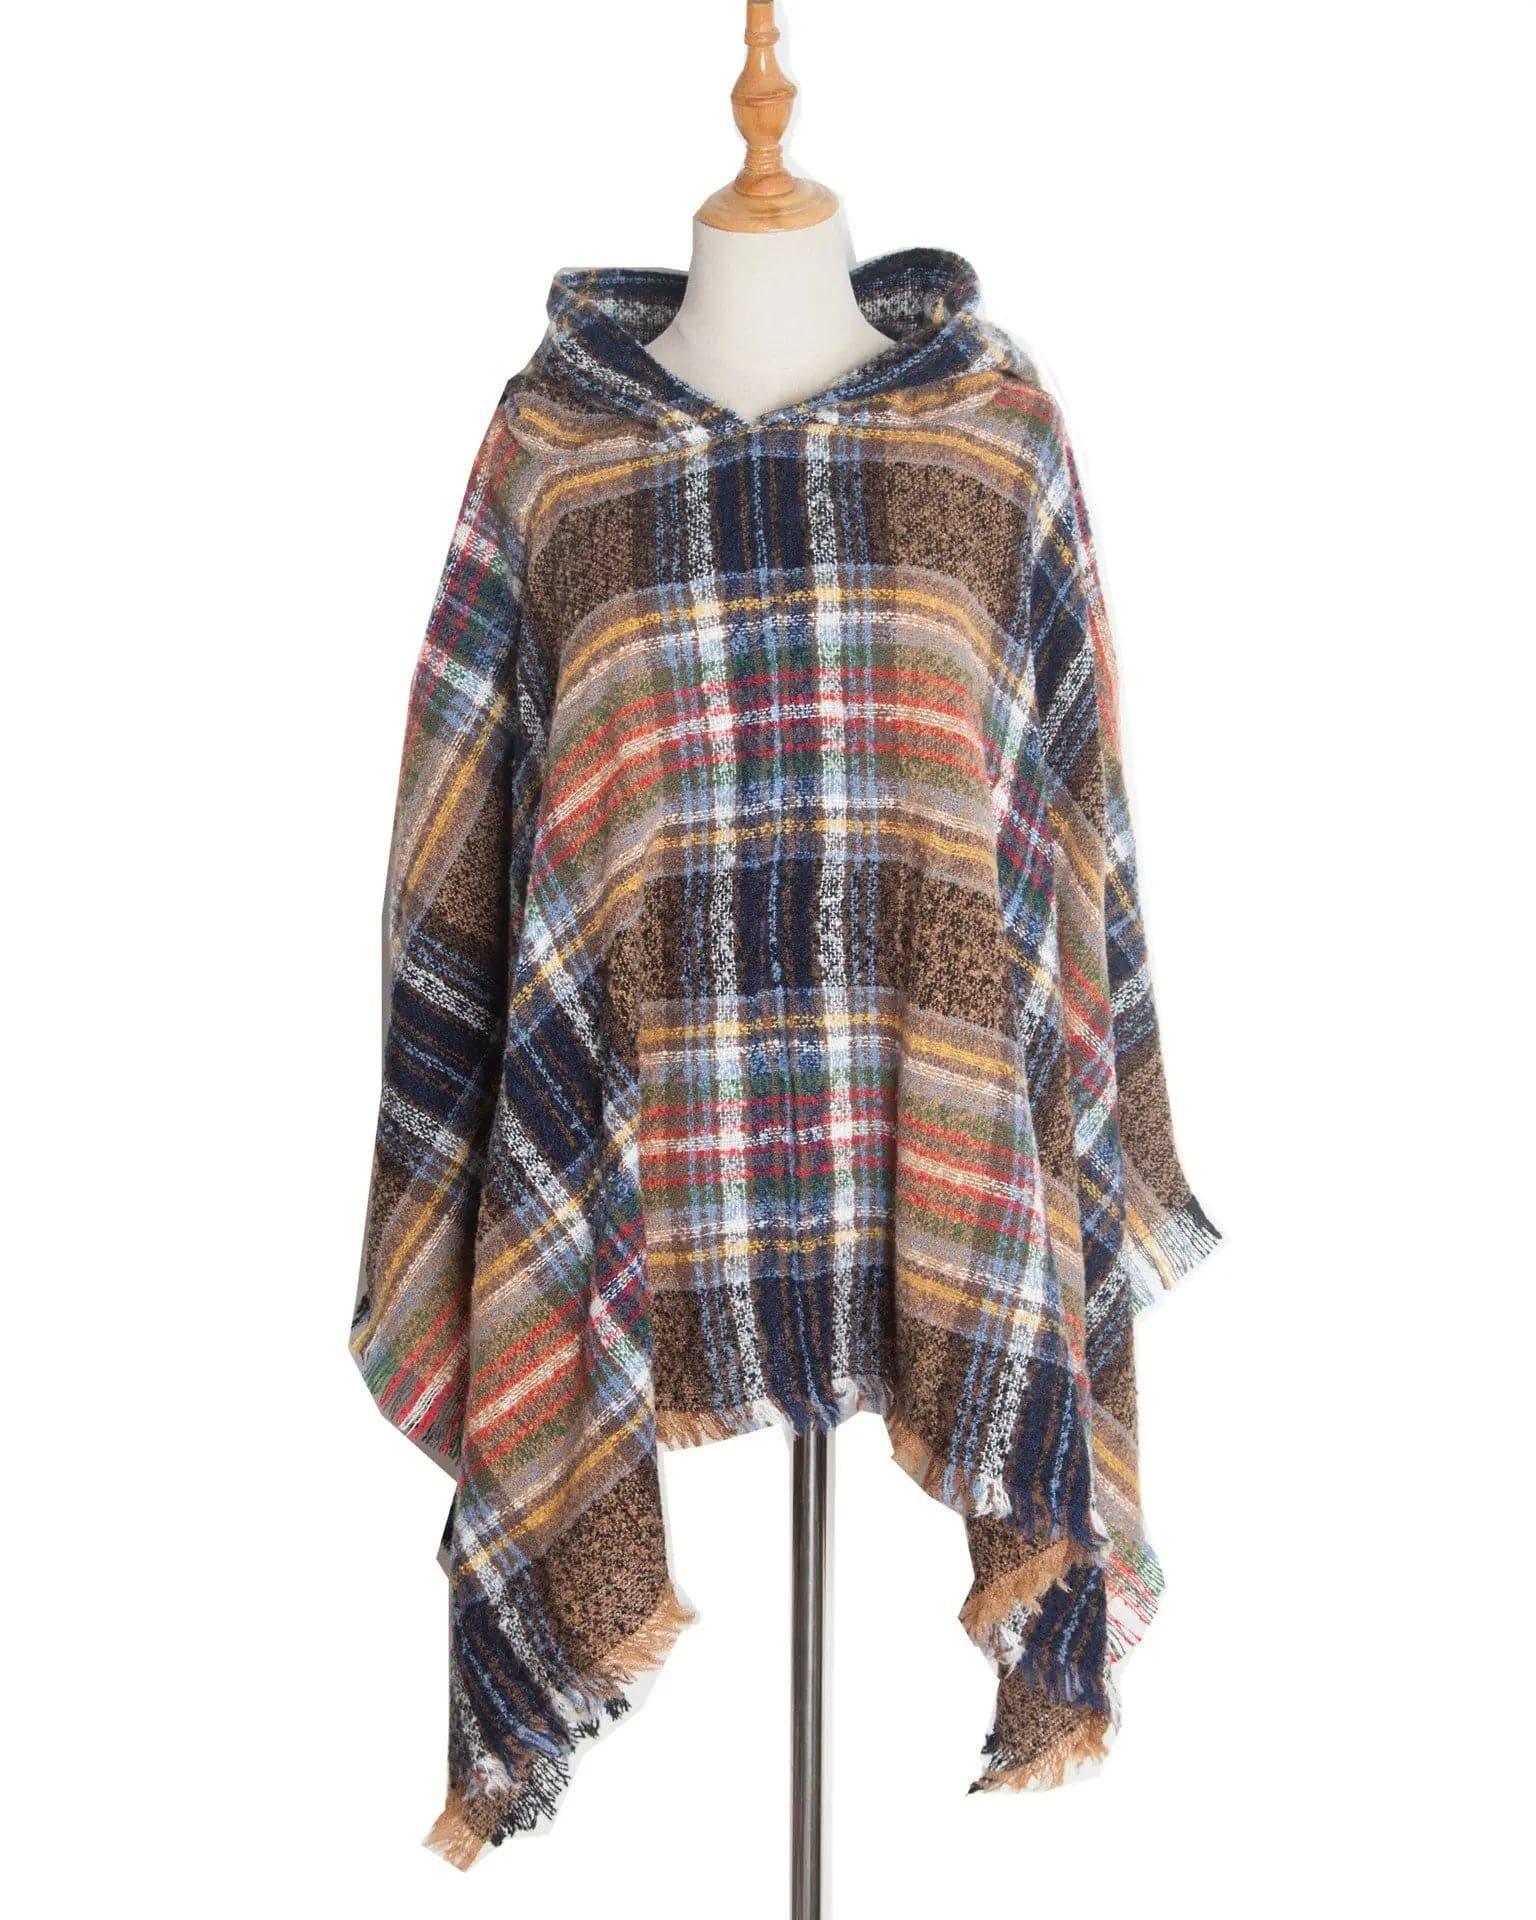 Spring Autumn And Winter Plaid Ribbon Cap Cape And Shawl-DP7 03 Camel-31